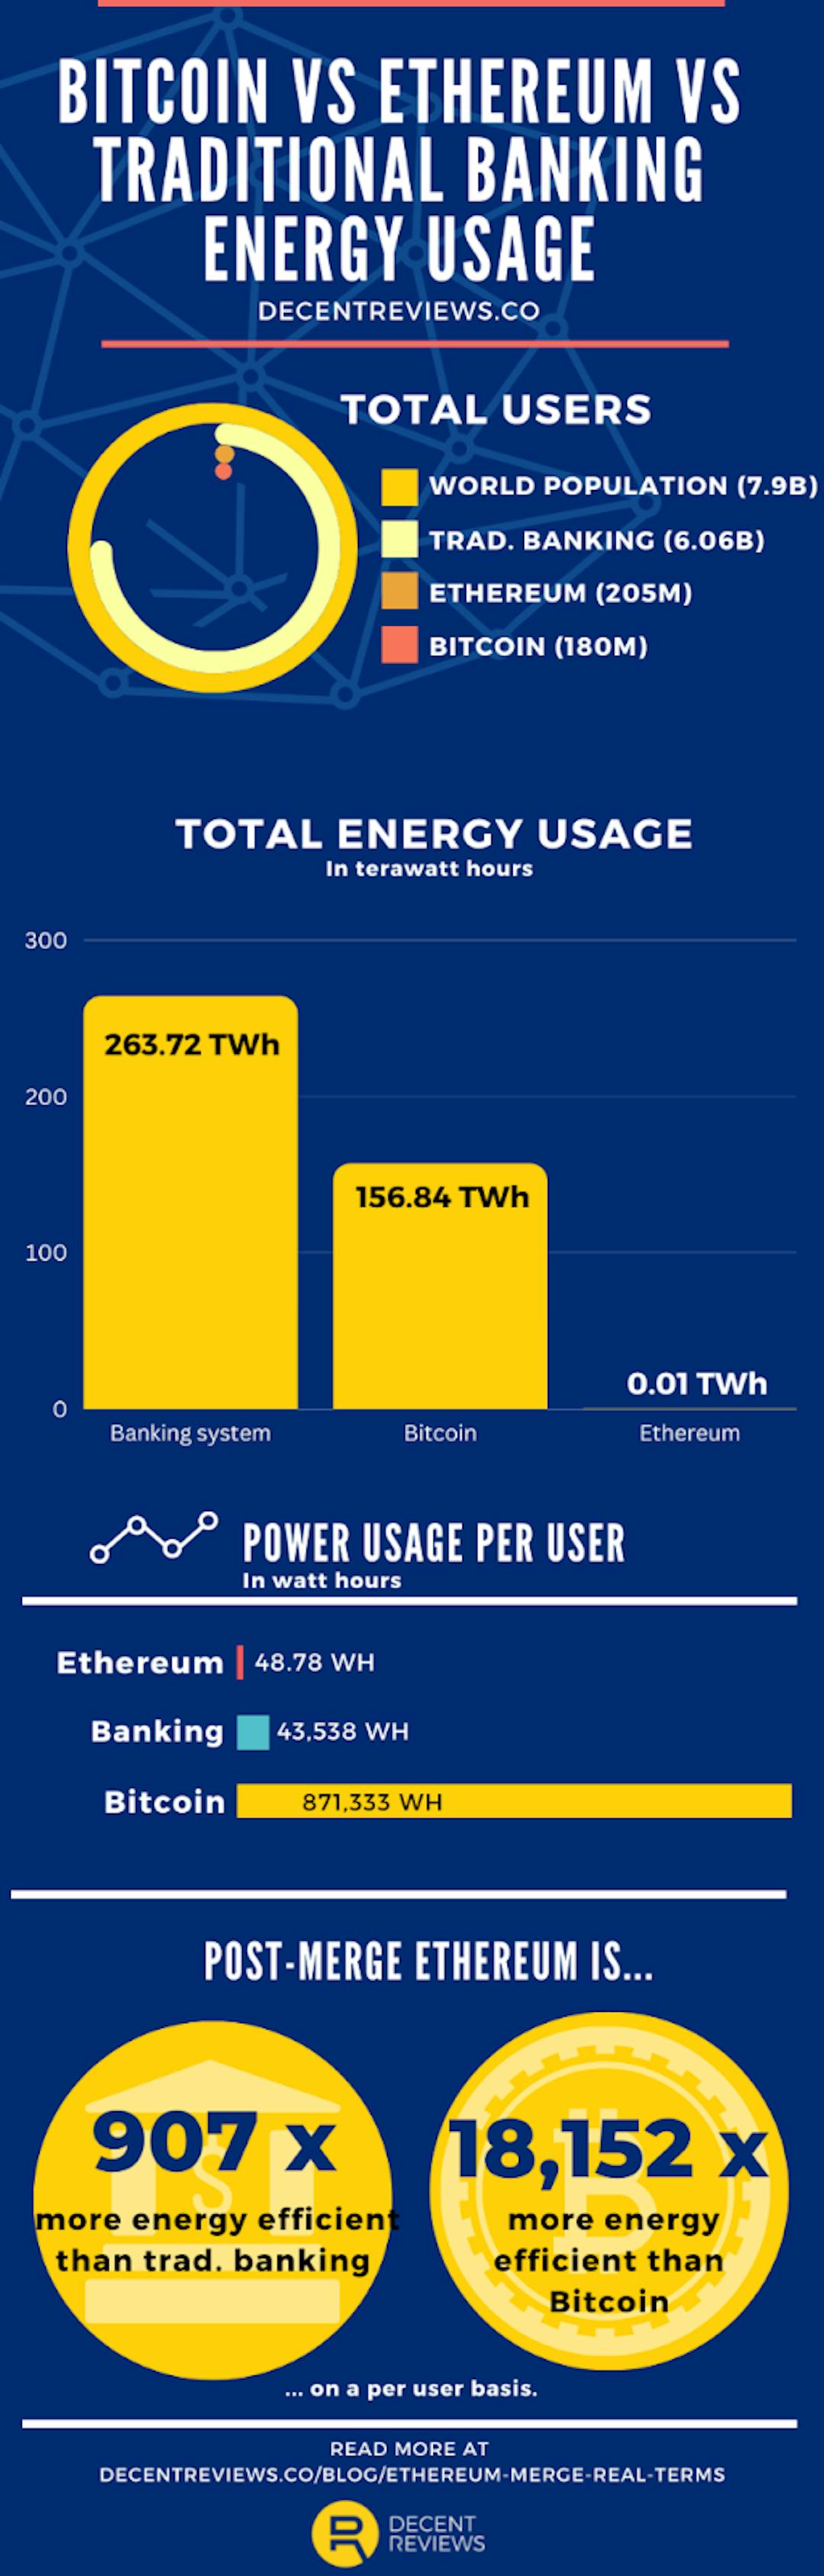 Energy use per user for bitcoin, ethereum, and traditional banking